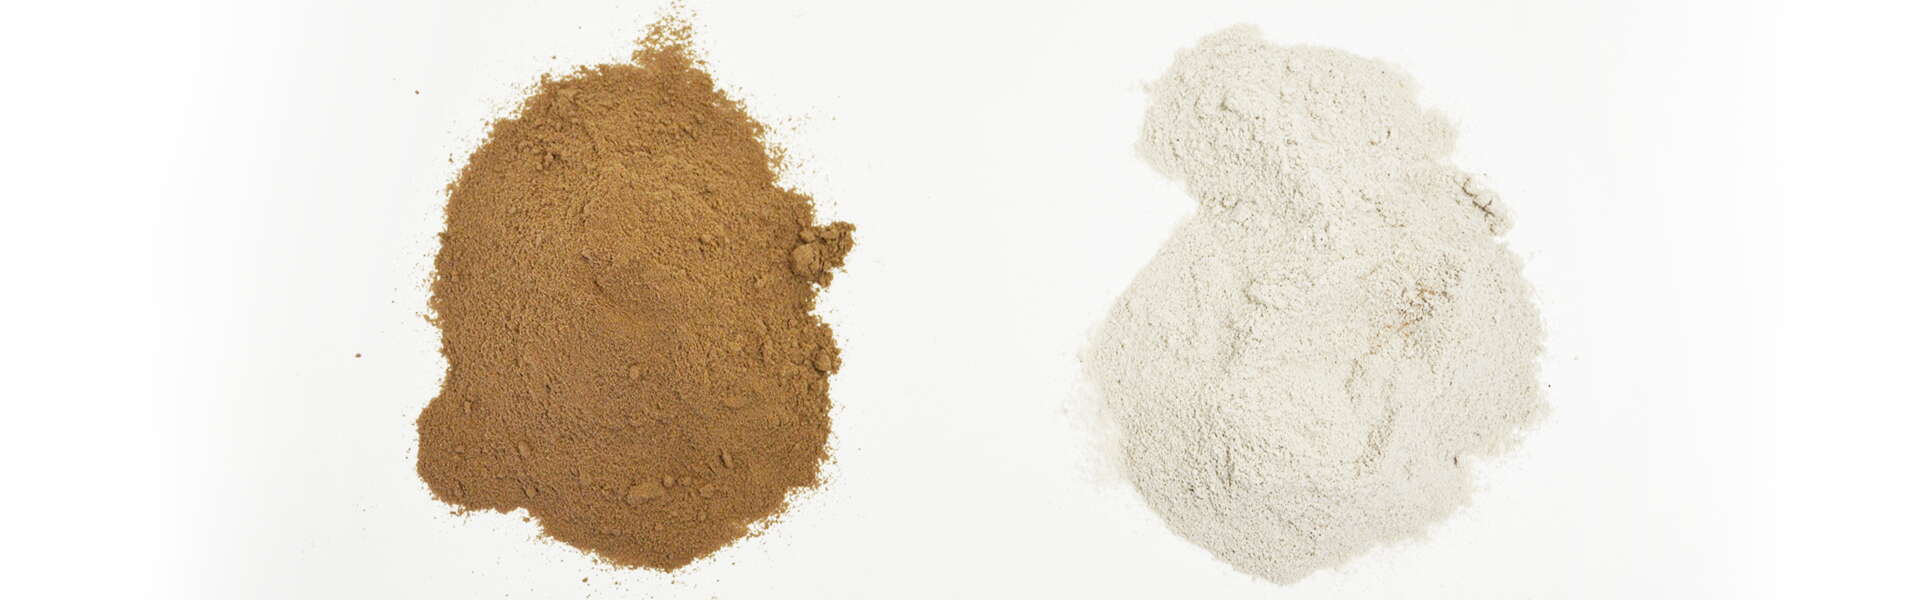 How to recognise the quality and purity of a protein supplement